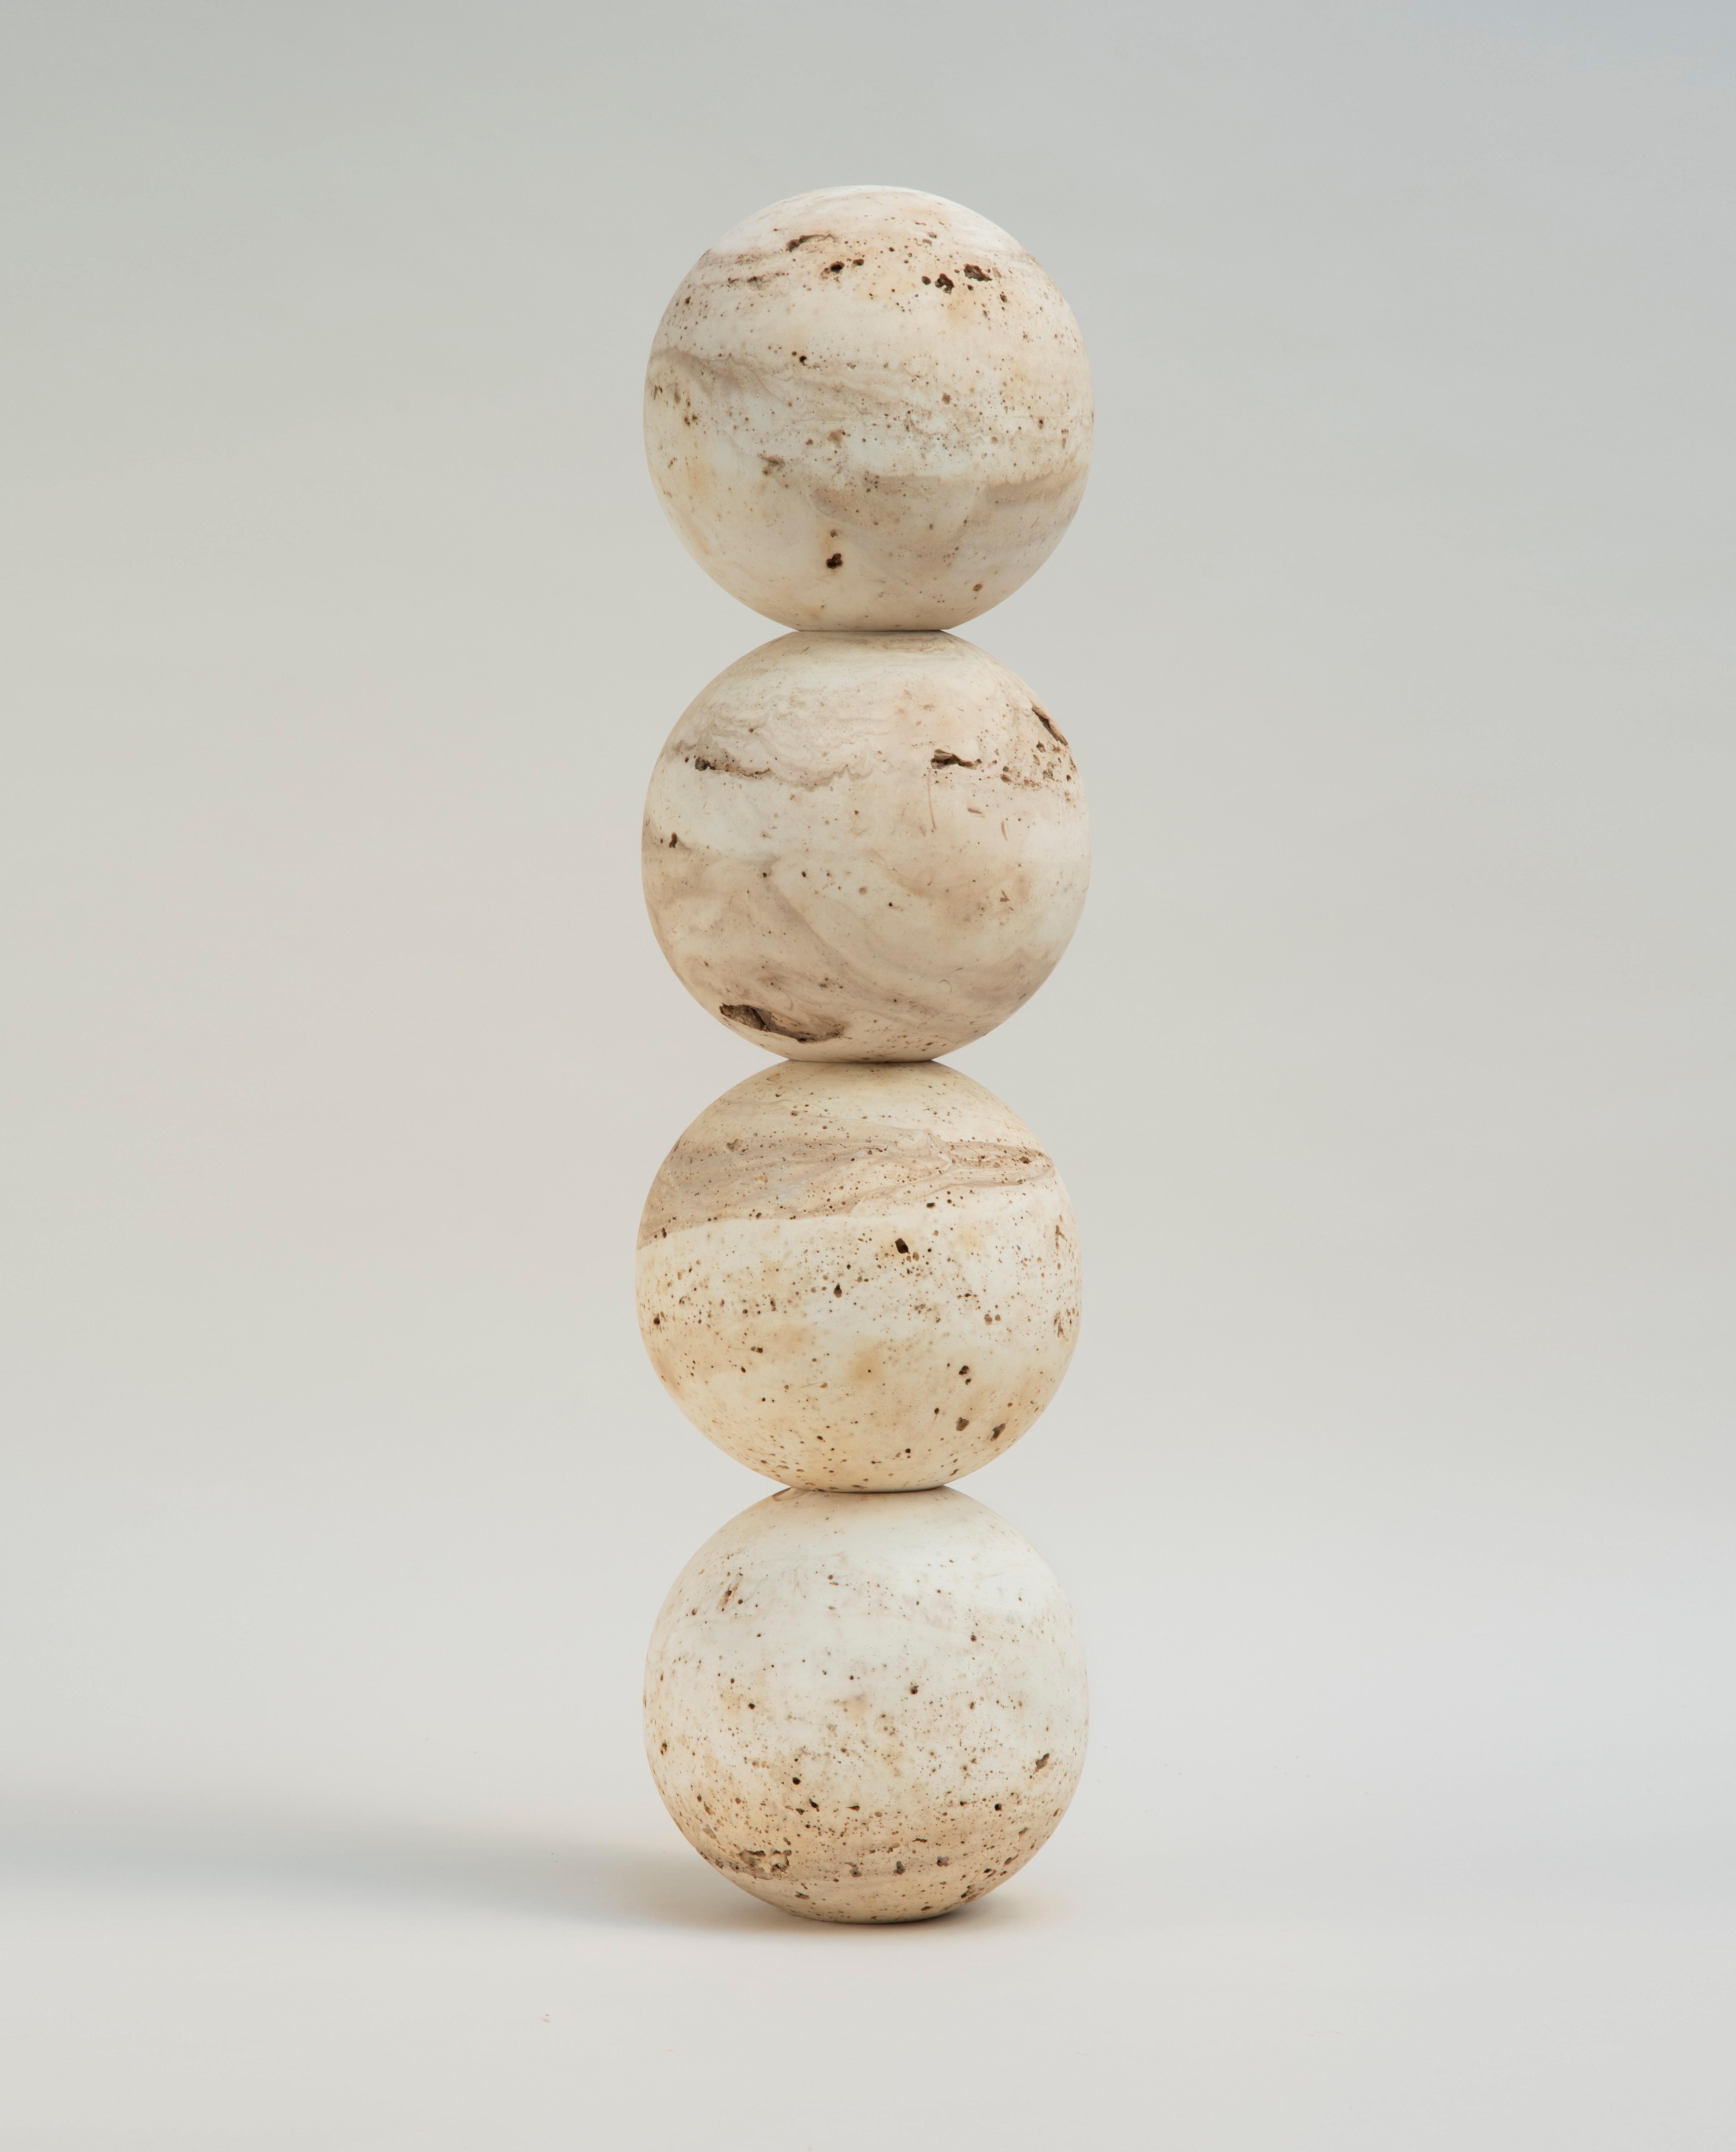 Jupiter 4 by Turbina
Future archeology
Dimensions: Ø 19.5 cm x H 77 cm
Materials: MDF

Jupiter project arises from the idea of the stone as symbol of sacredness. Therefore Jupiter is a modular piece composed by spheres and semispheres stancked